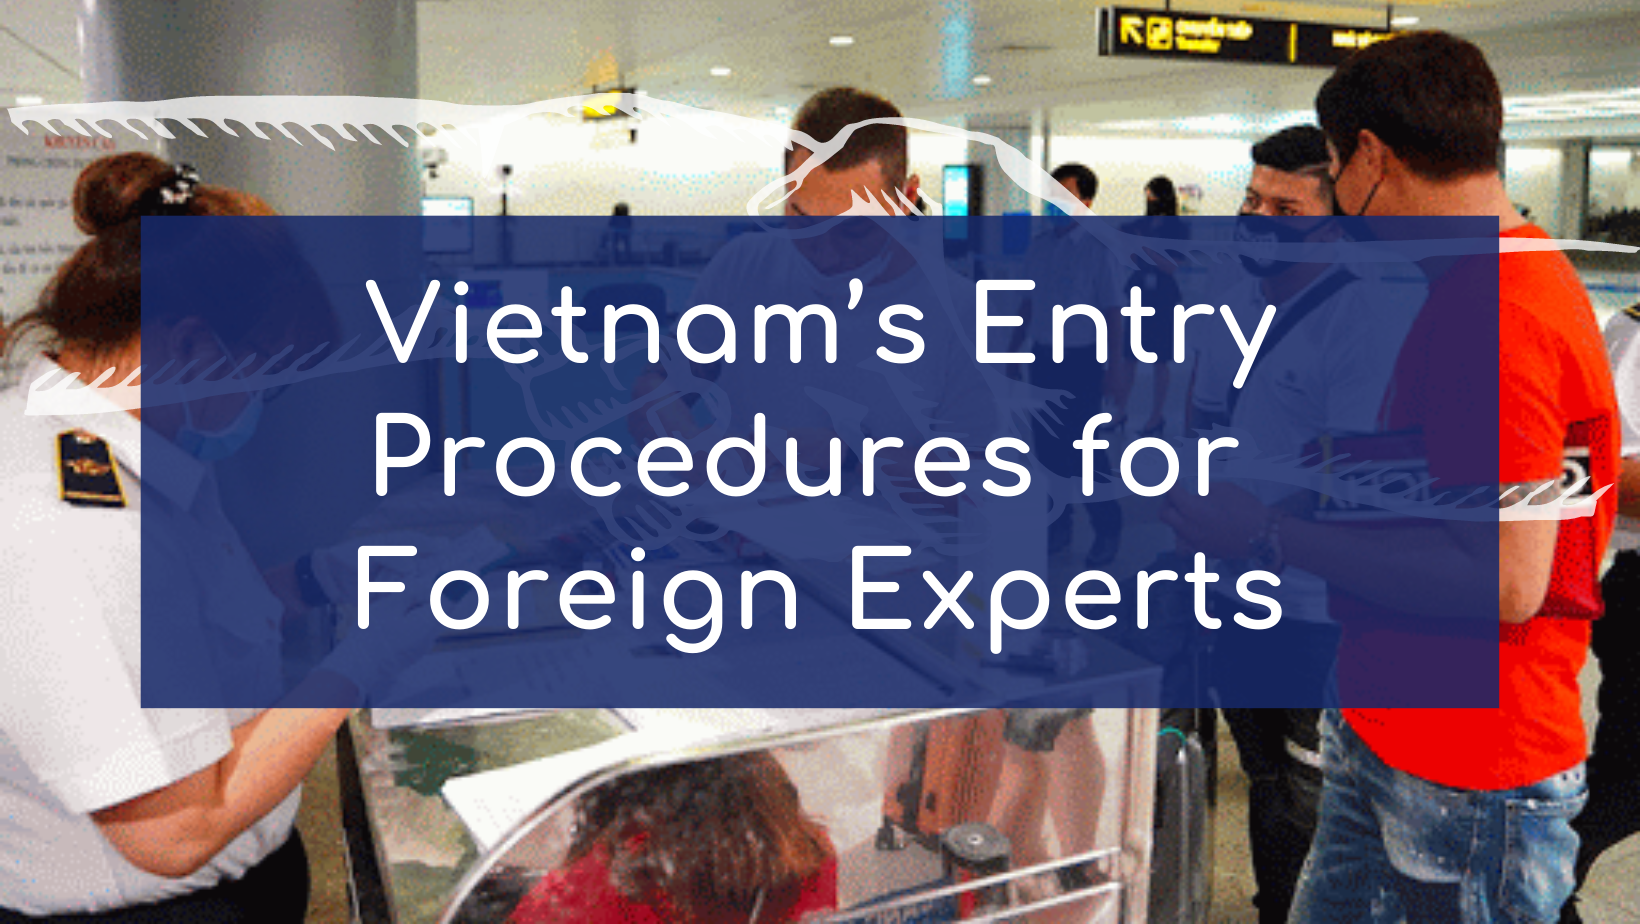 Vietnam’s Entry Procedures for Foreign Experts